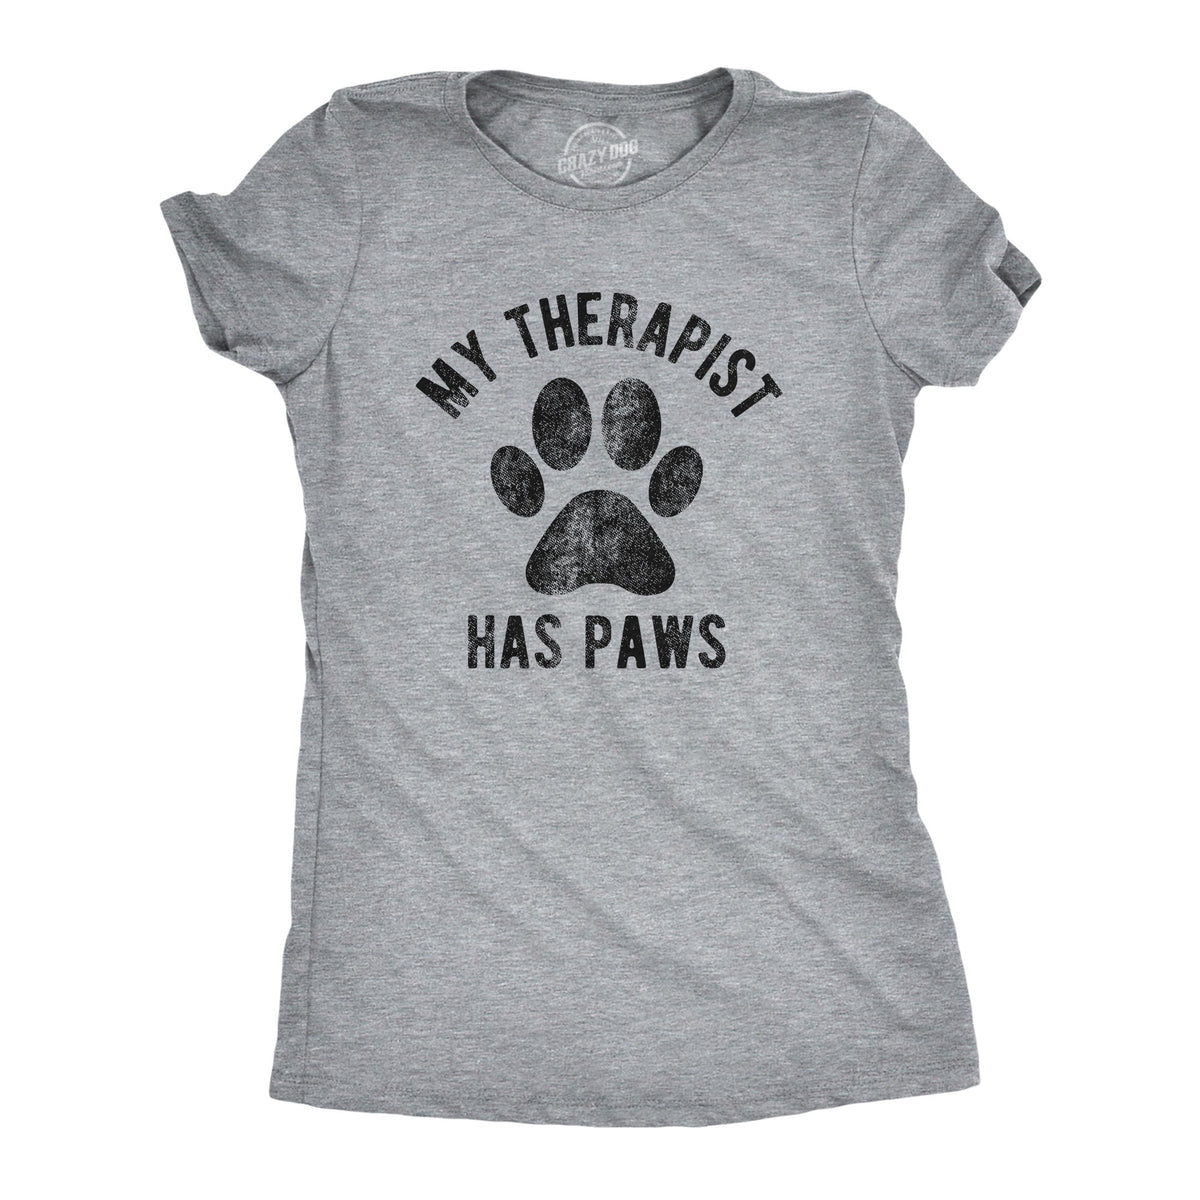 Funny Light Heather Grey - Therapist Paws My Therapist Has Paws Womens T Shirt Nerdy Dog Tee